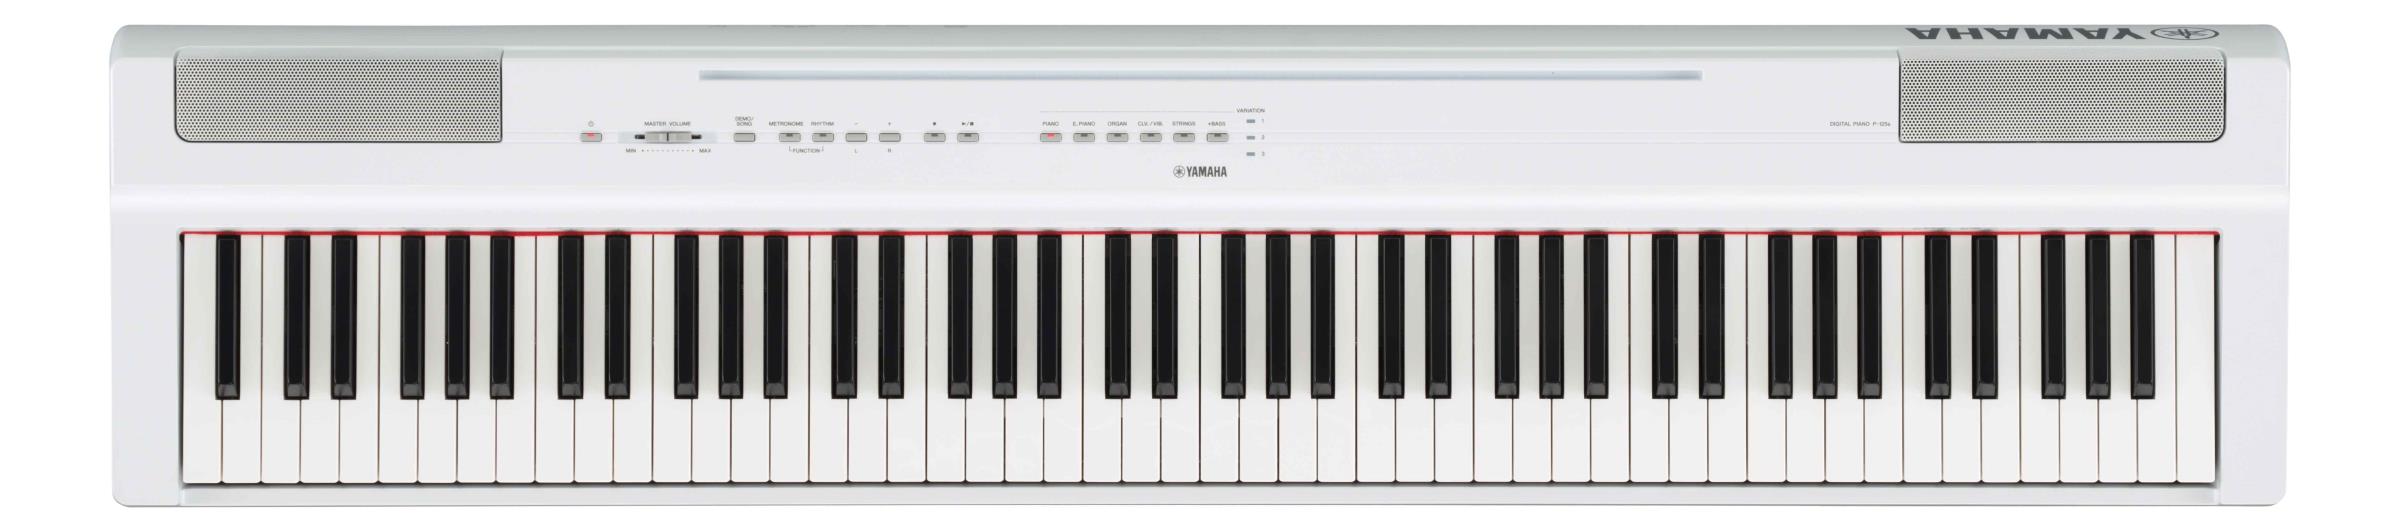 Yamaha P-125A wh weiß Stagepiano